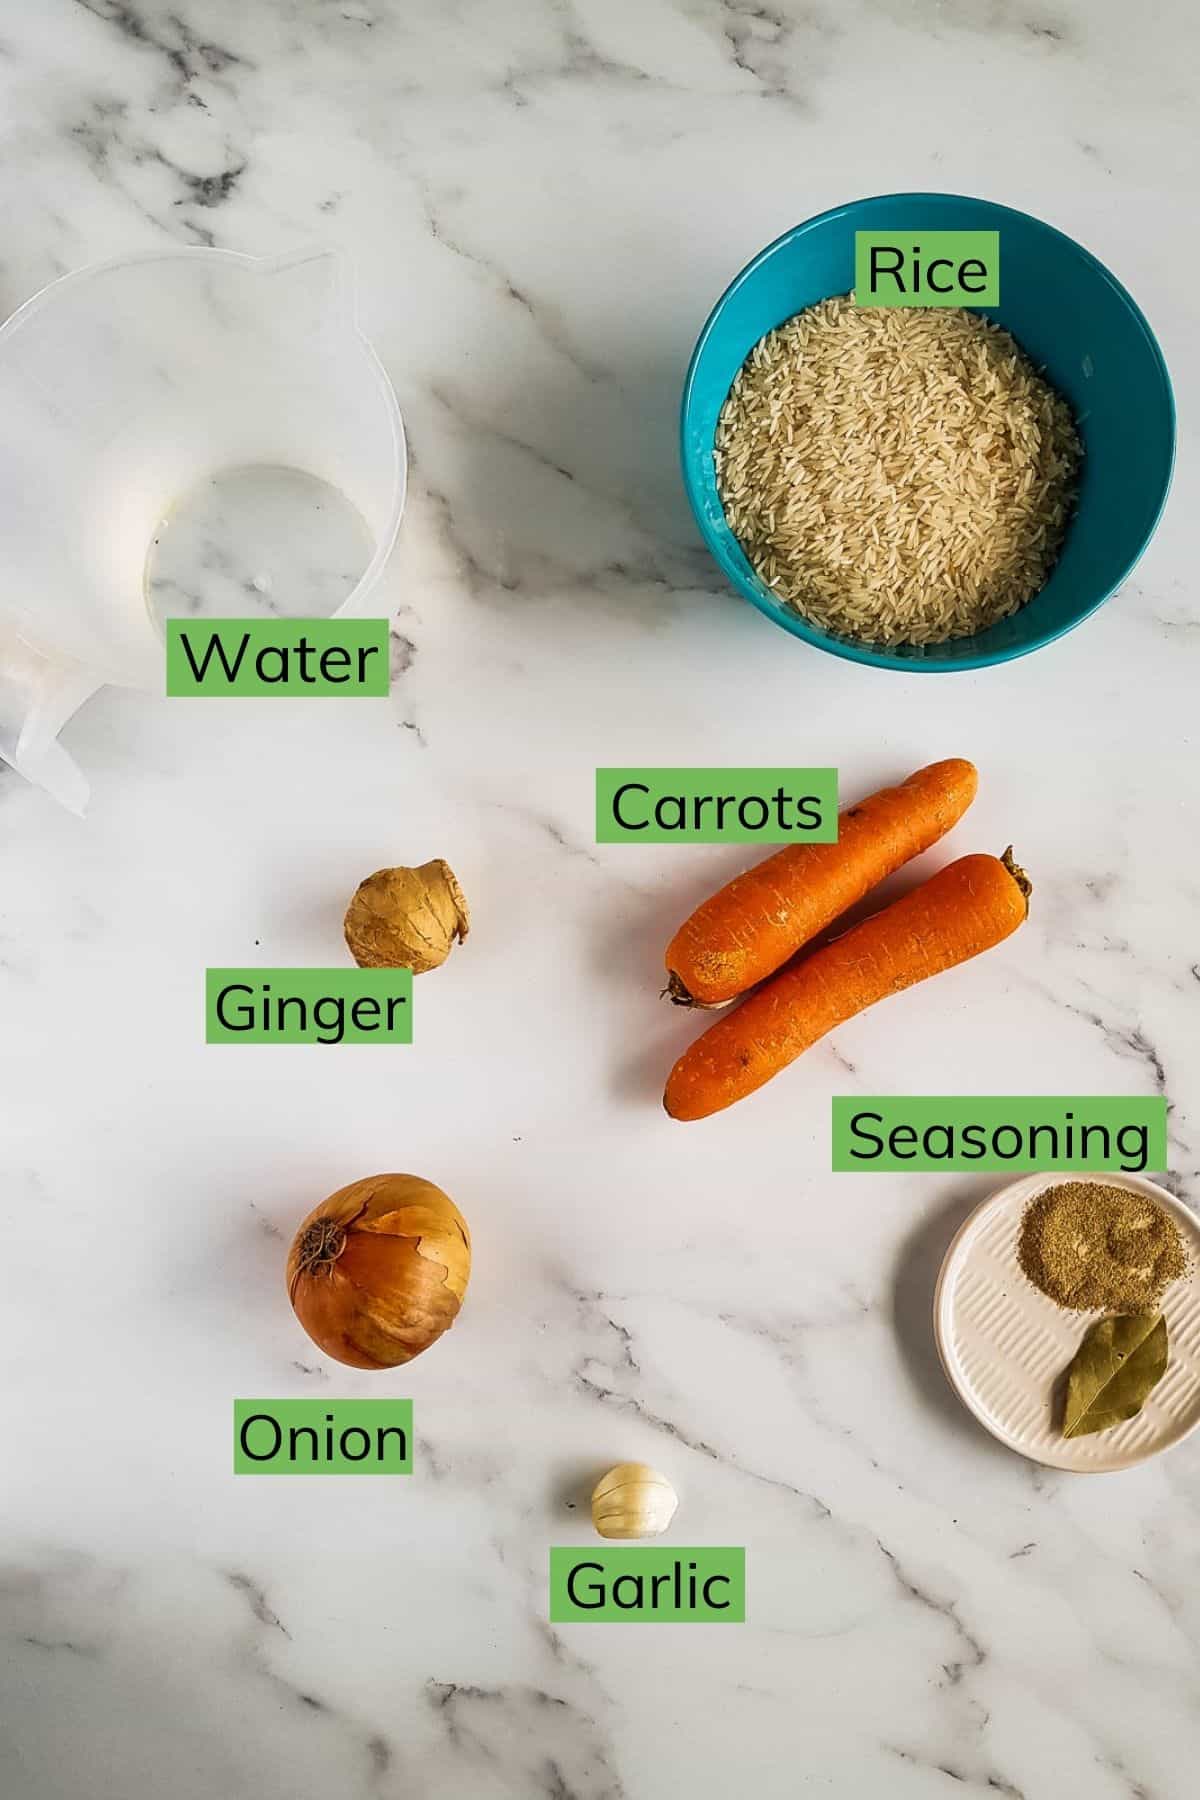 Ingredients for carrot rice laid out on a table.